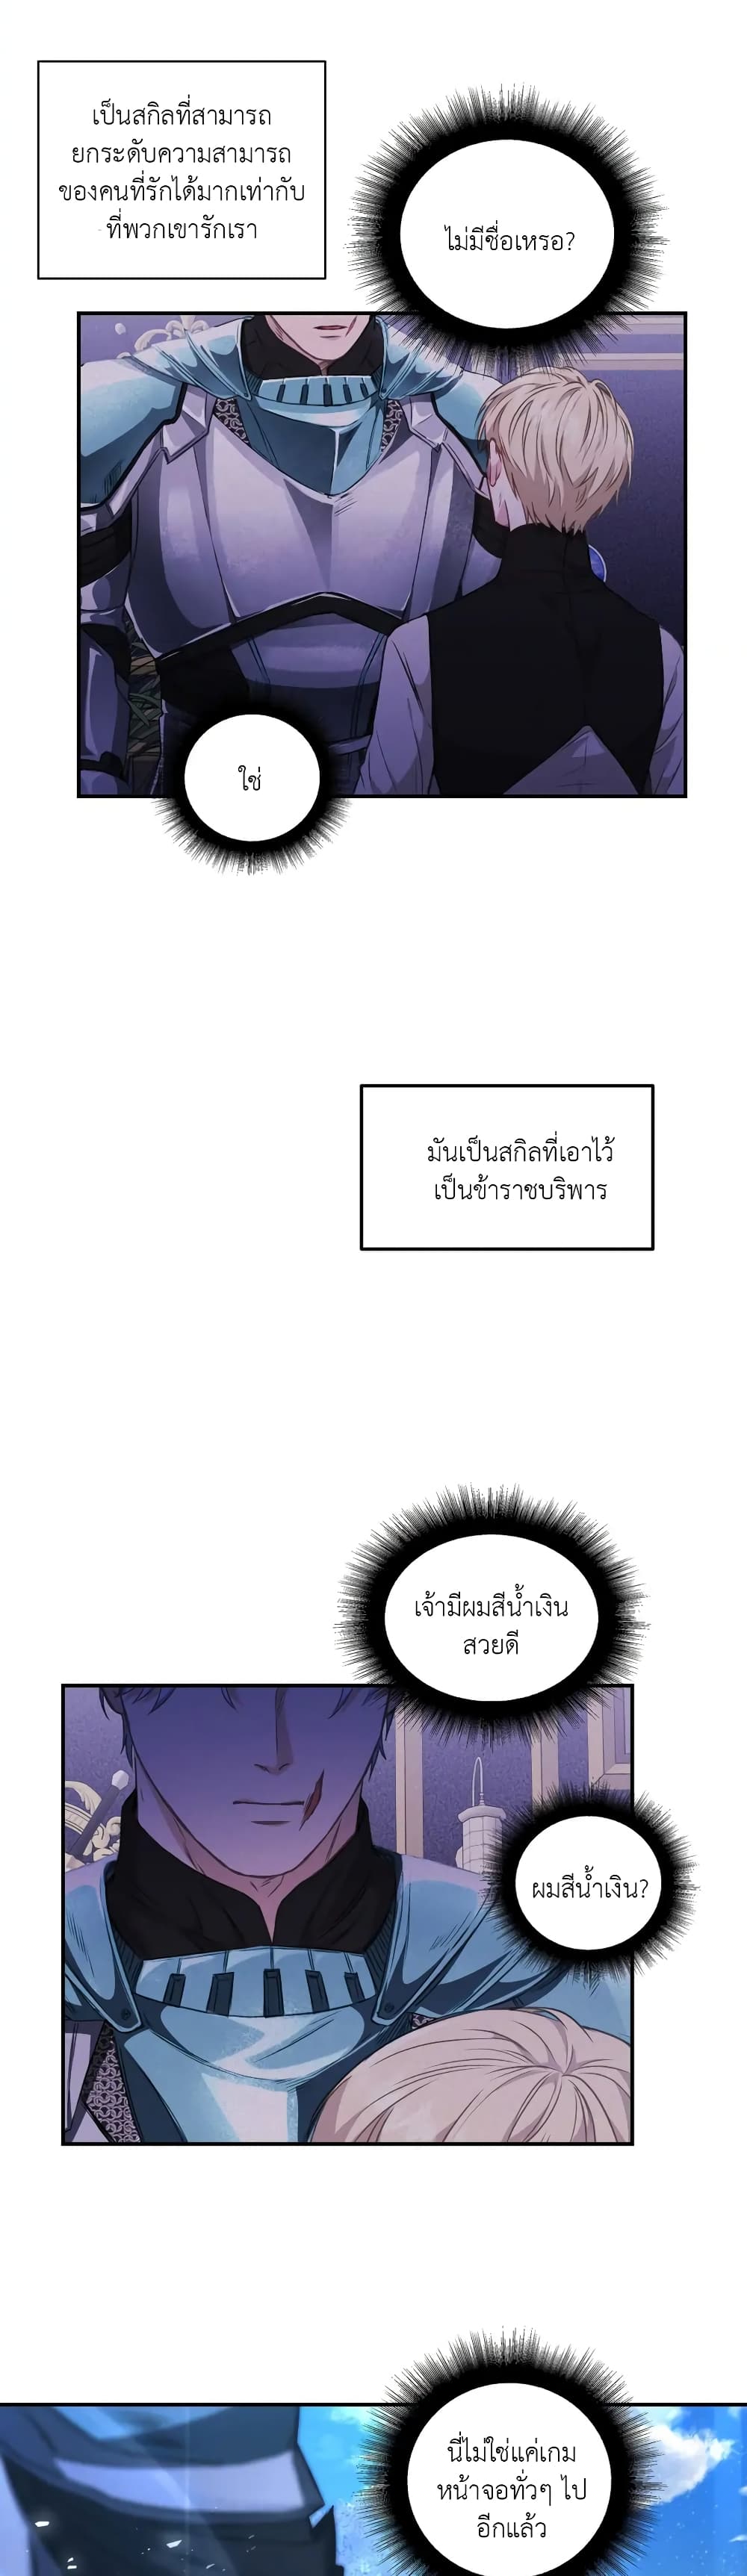 How to Survive as a Player ตอนที่ 2 (26)